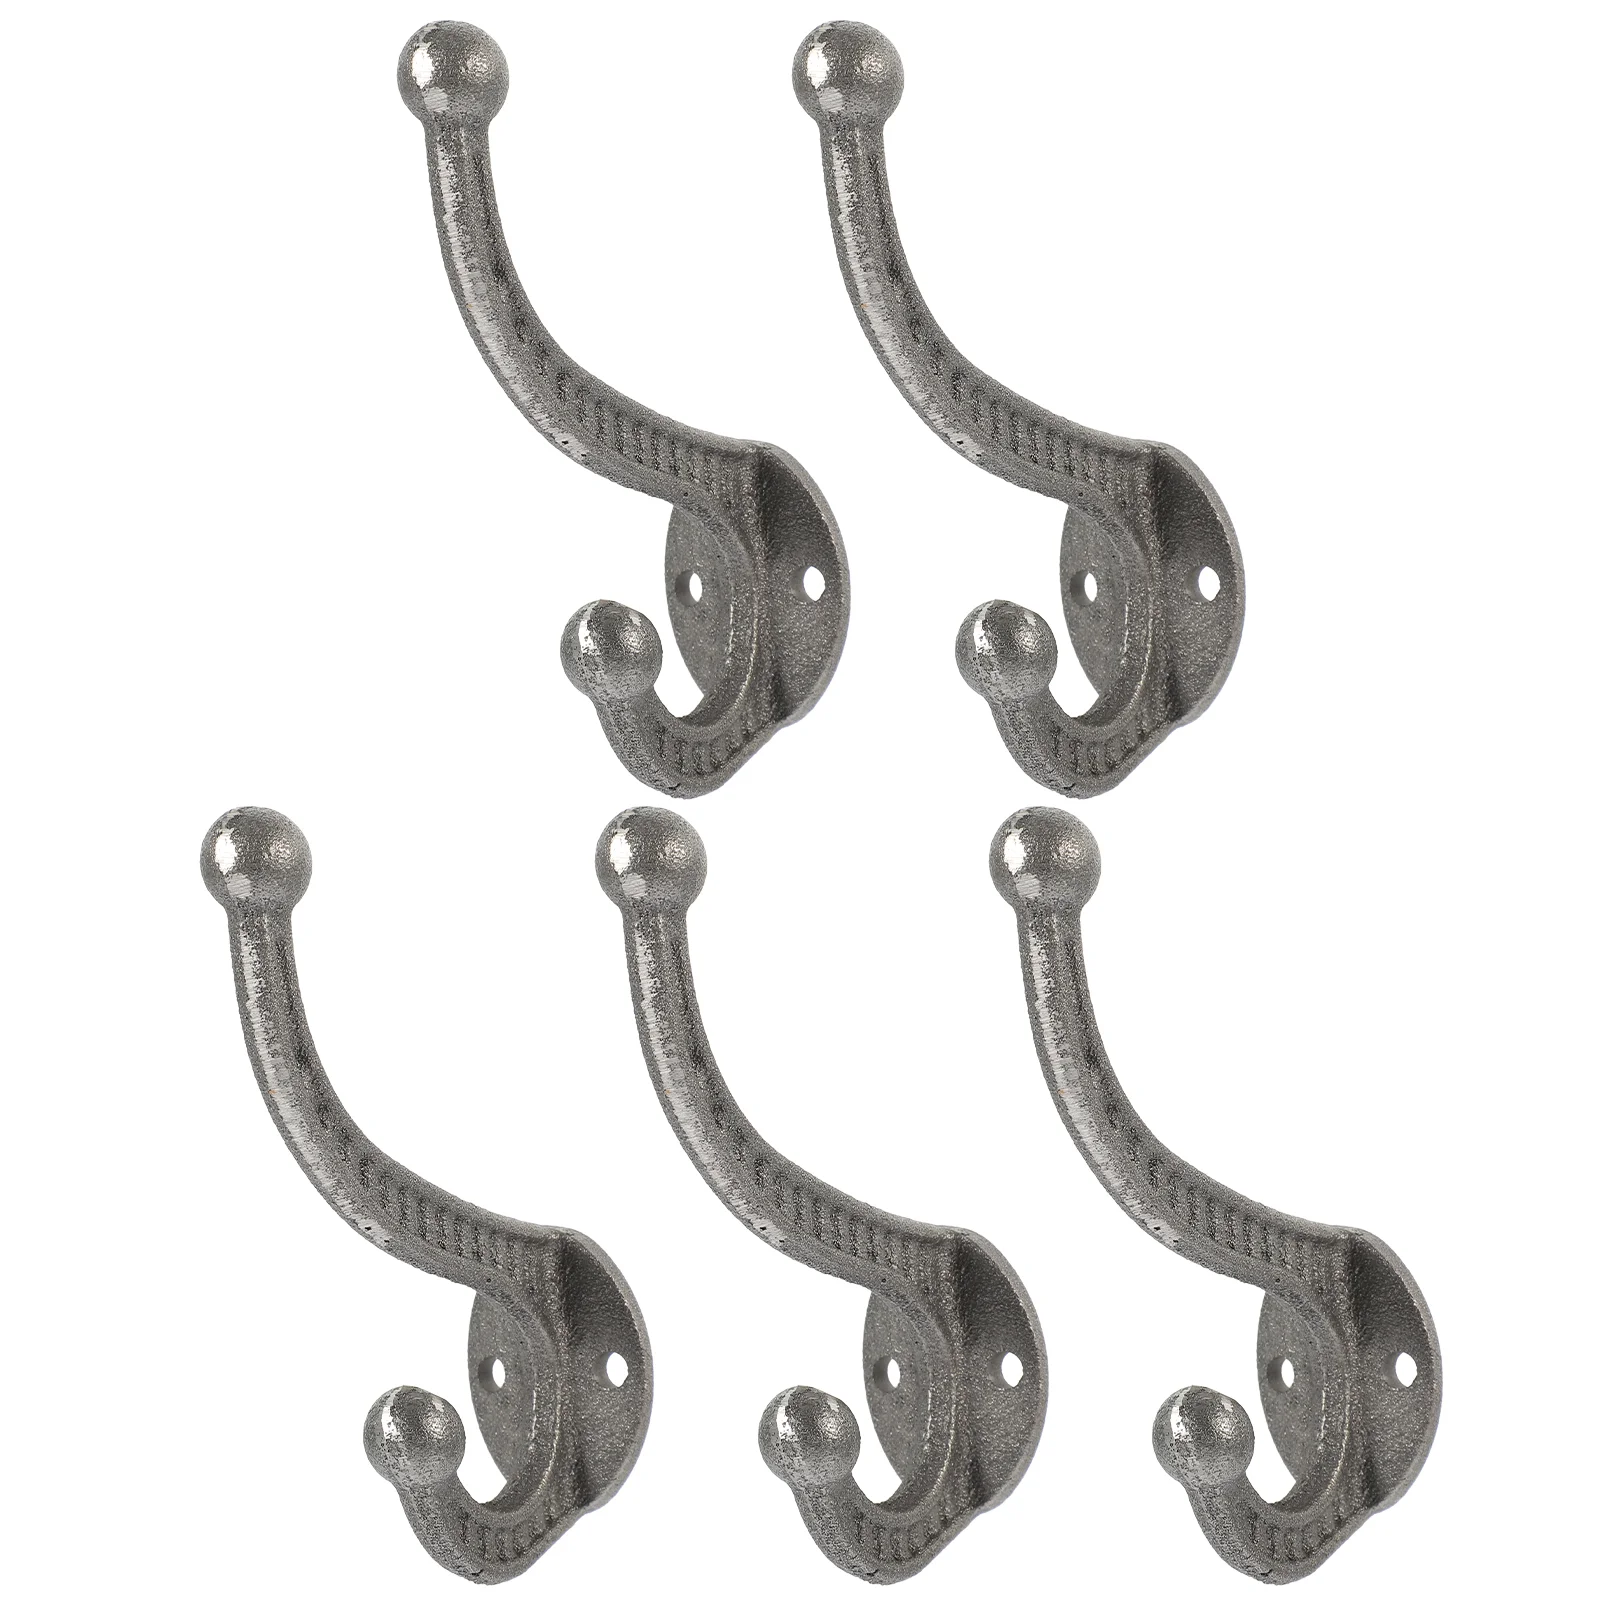 

5 Pcs Wall Hangers Clothes Double Cast Iron Hook Coat Hooks Country Style Hanging Heavy Duty Hat Racks Rustic